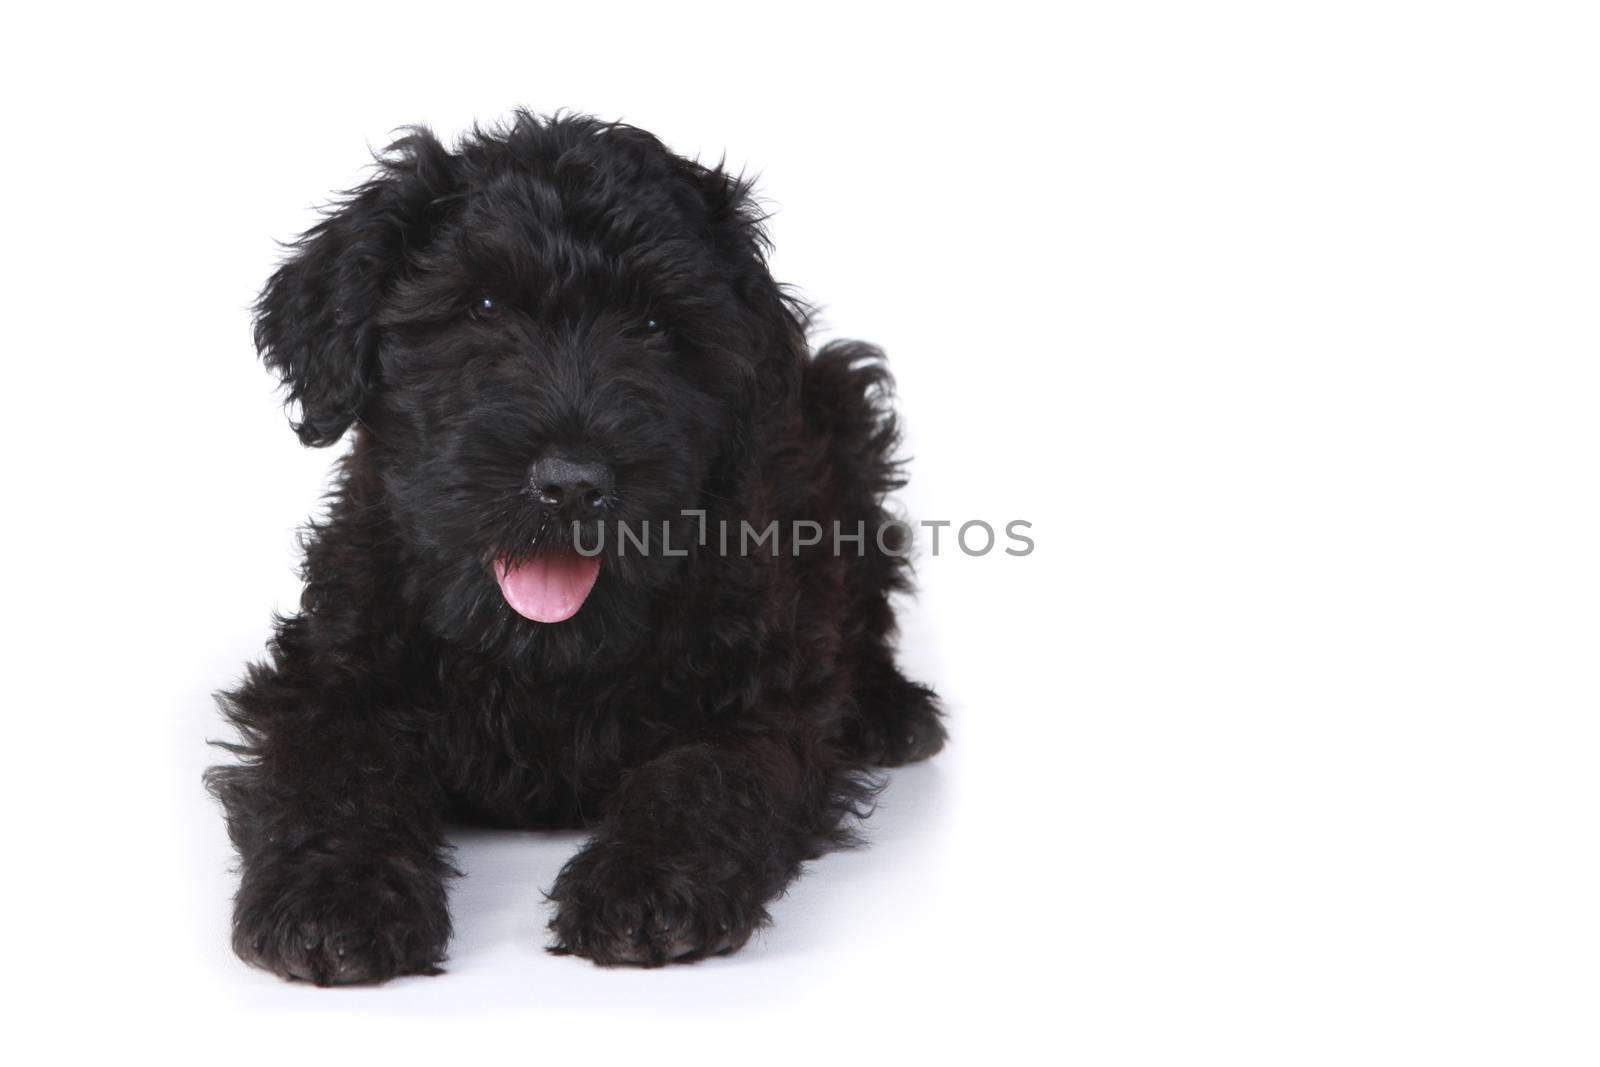 Little Black Russian Terrier Puppy on a White Background 